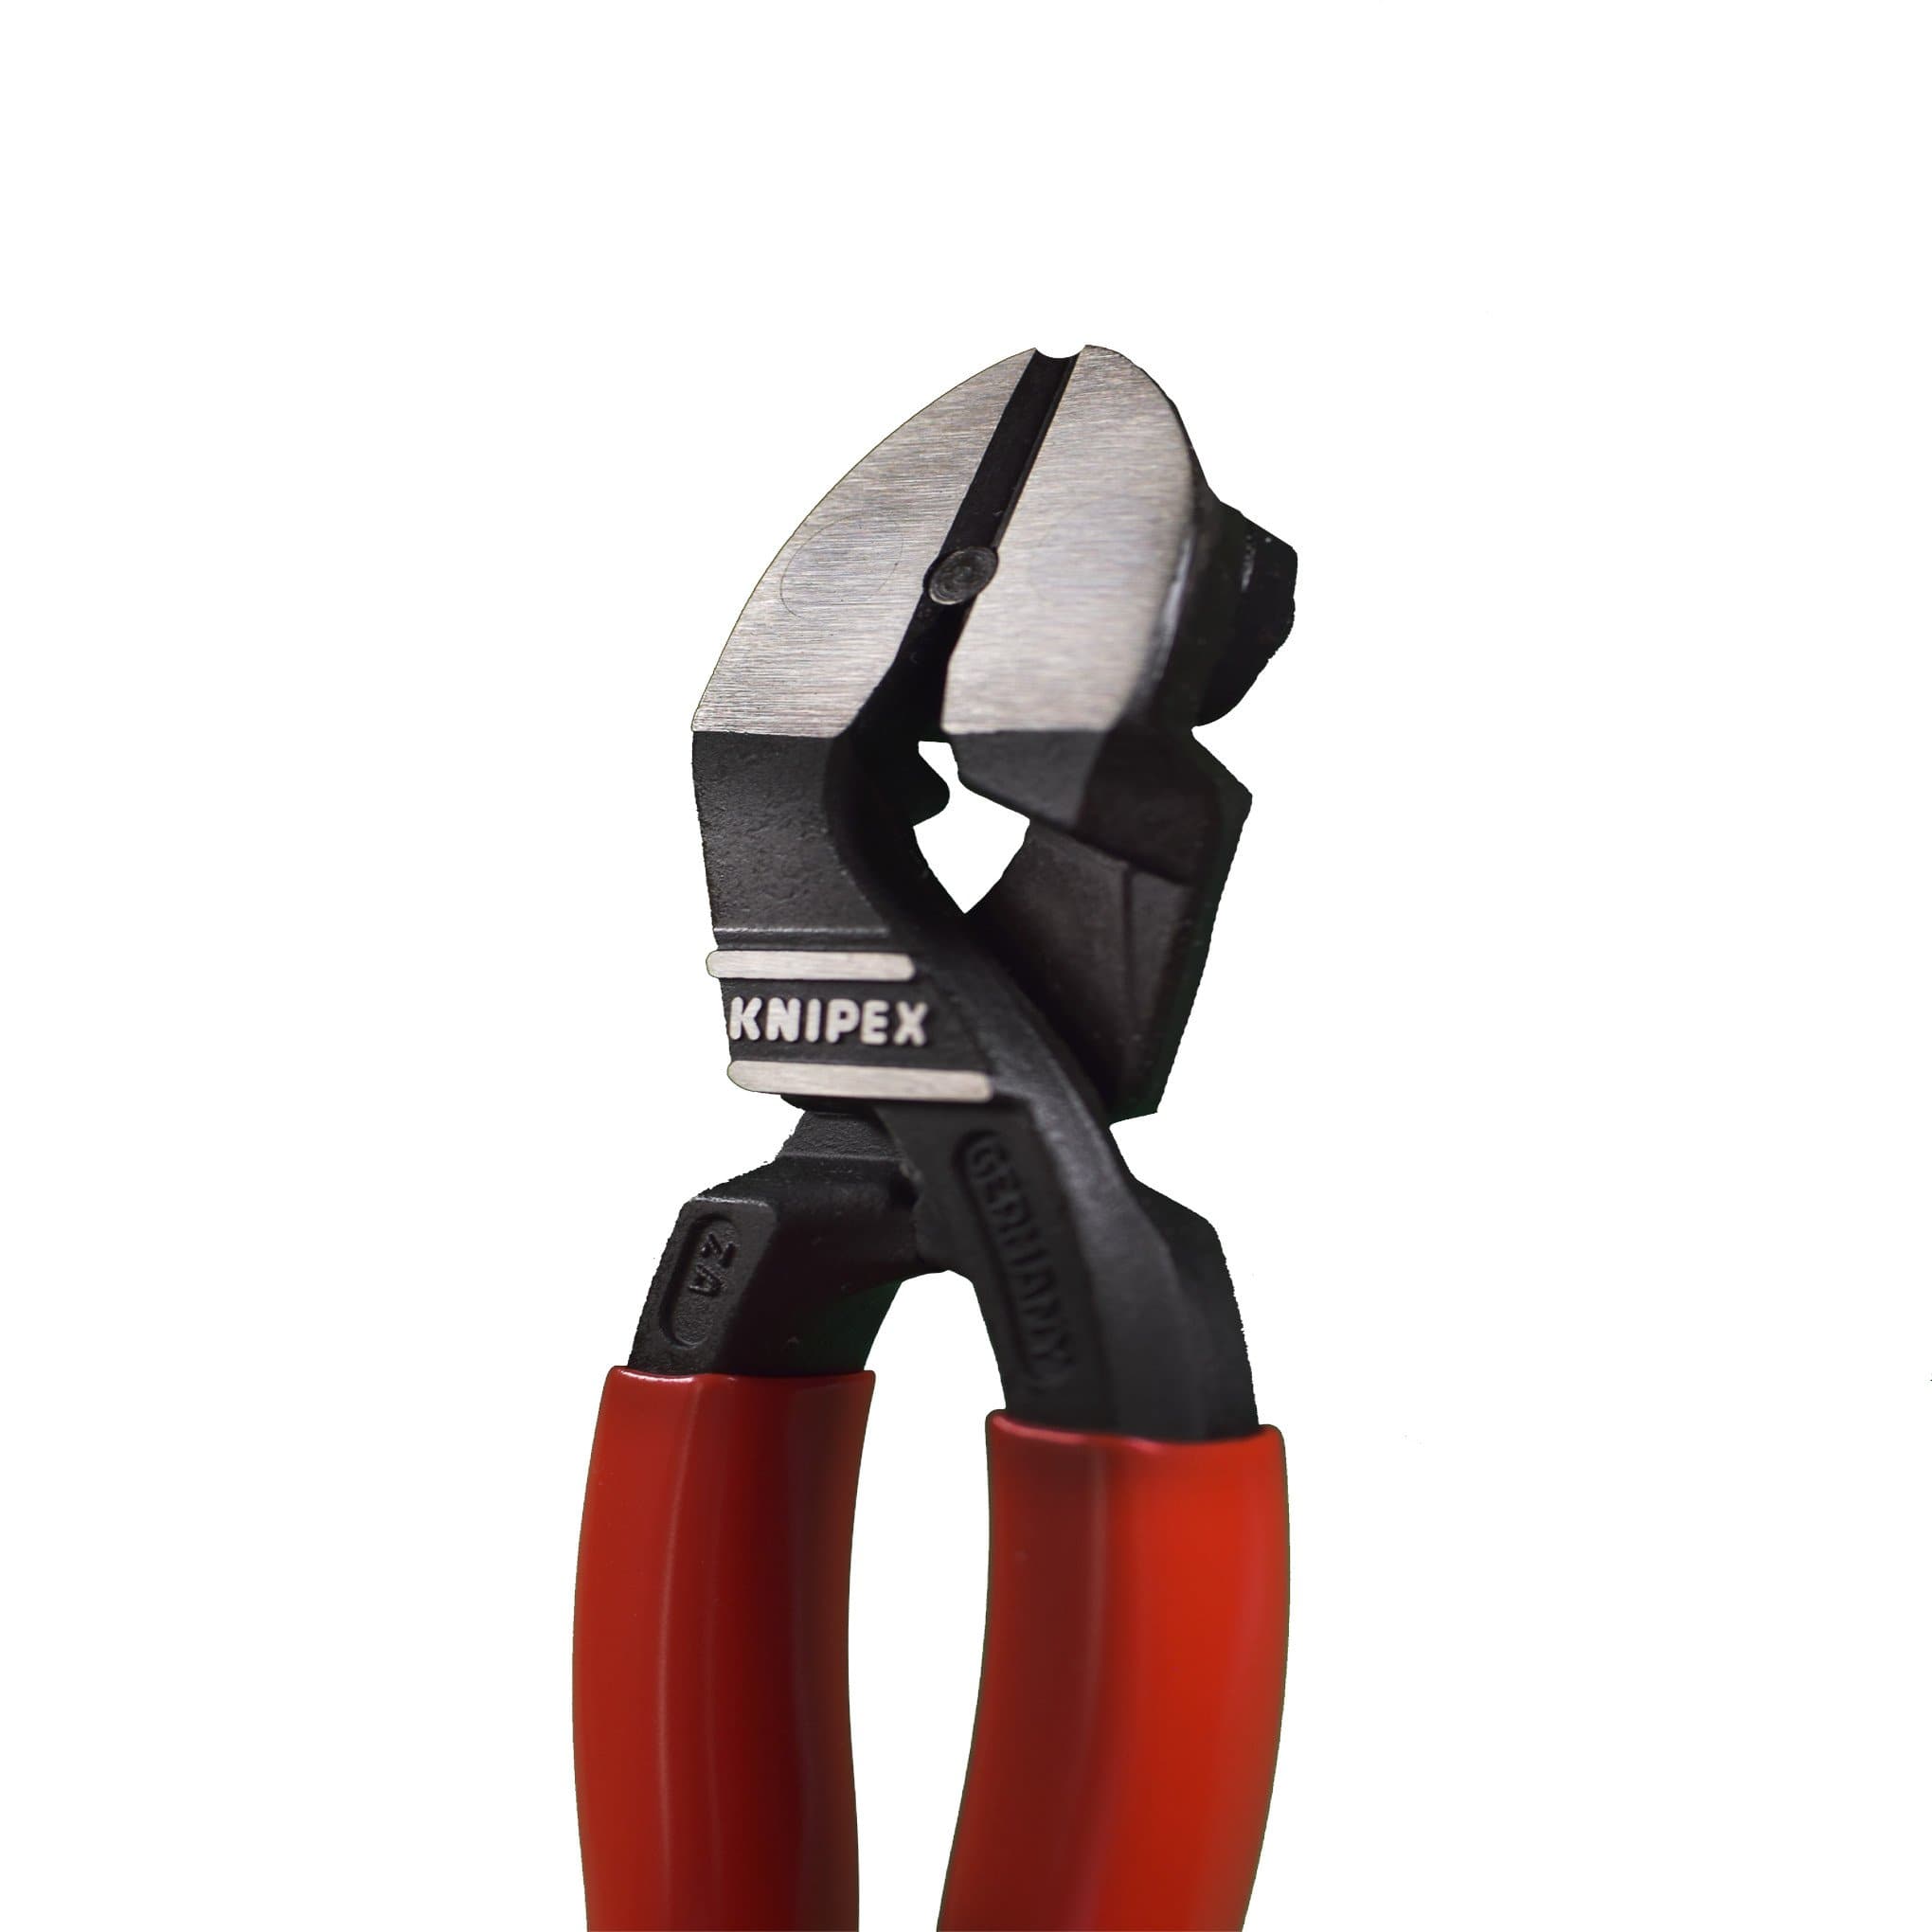 Knipex Angled Compact Cutter High Leverage 71-21-200 - FenceSupplyCo.com